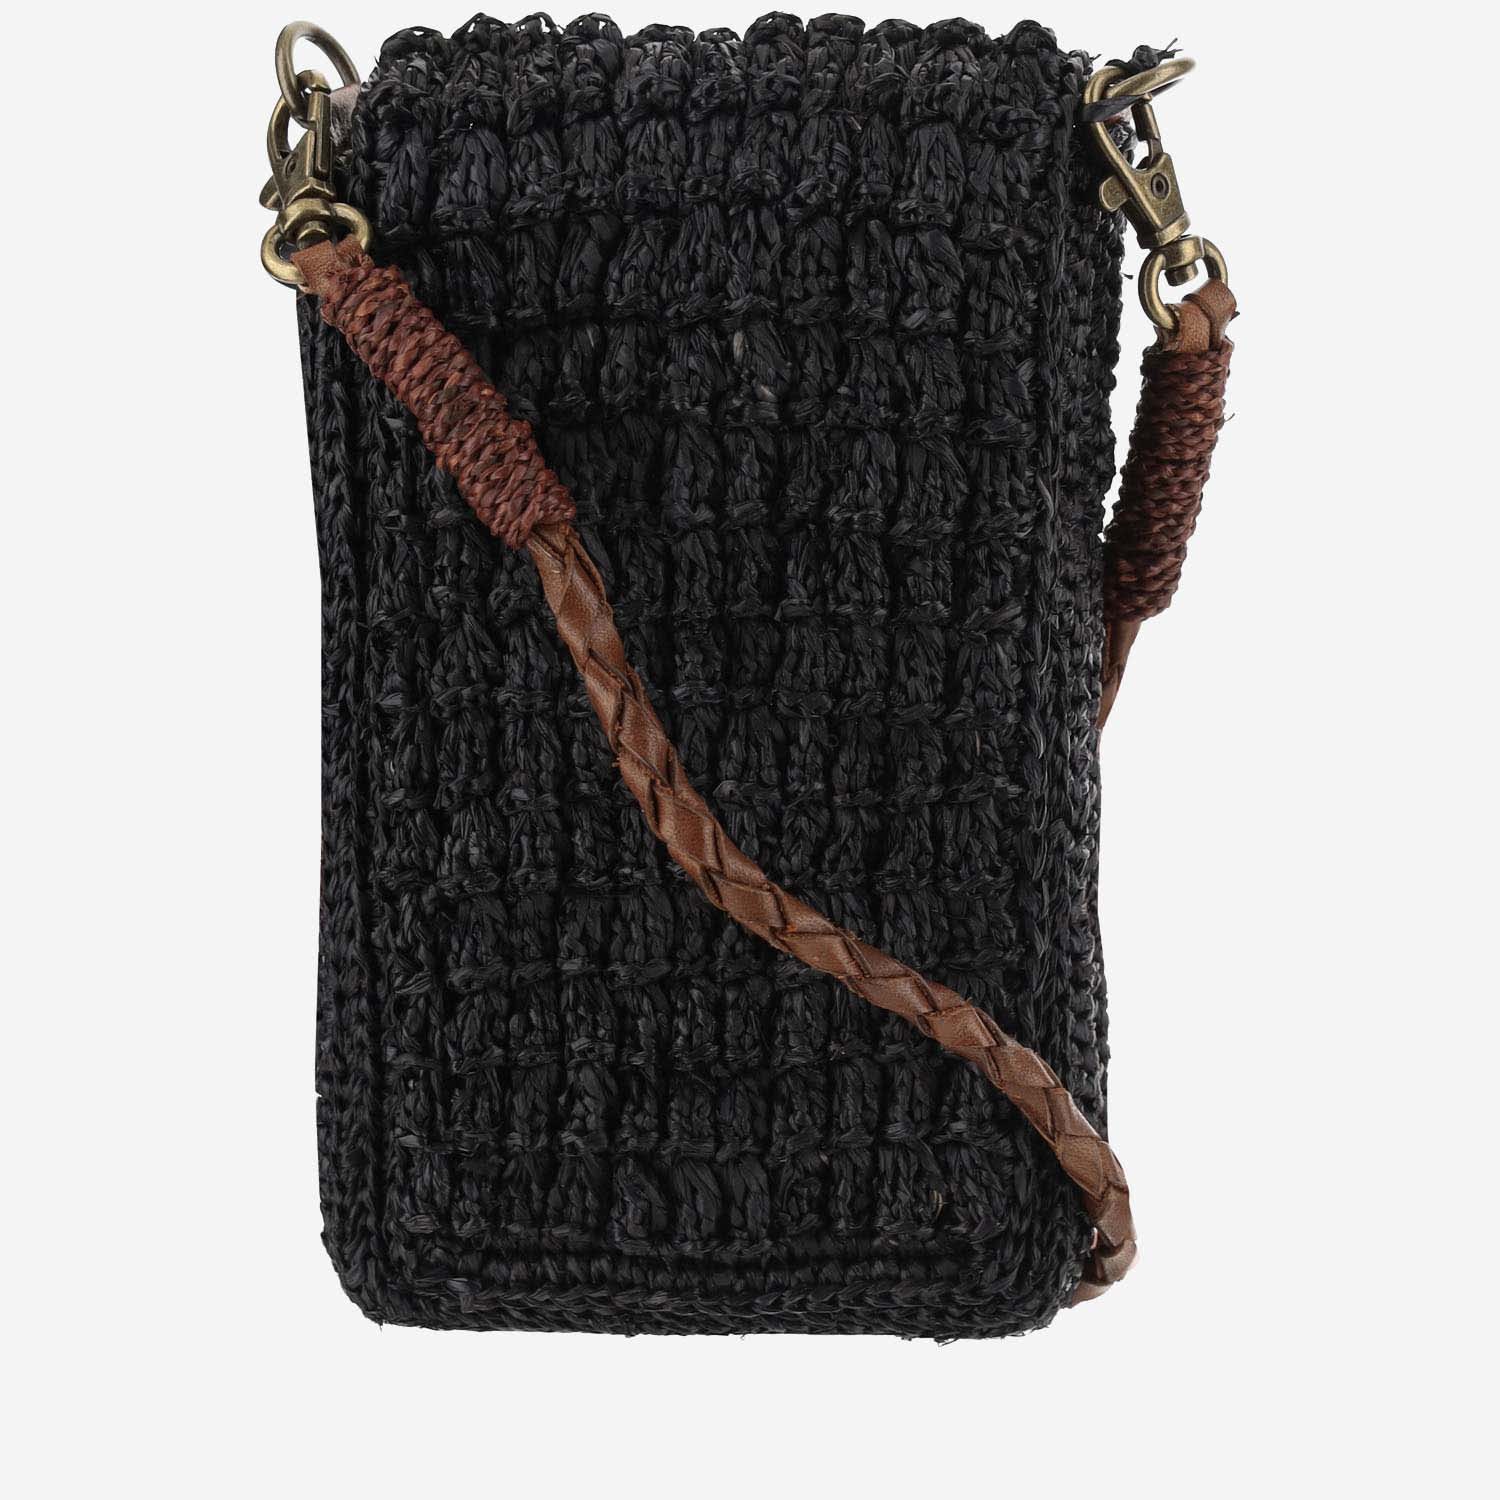 Raffia Bag With Leather Details